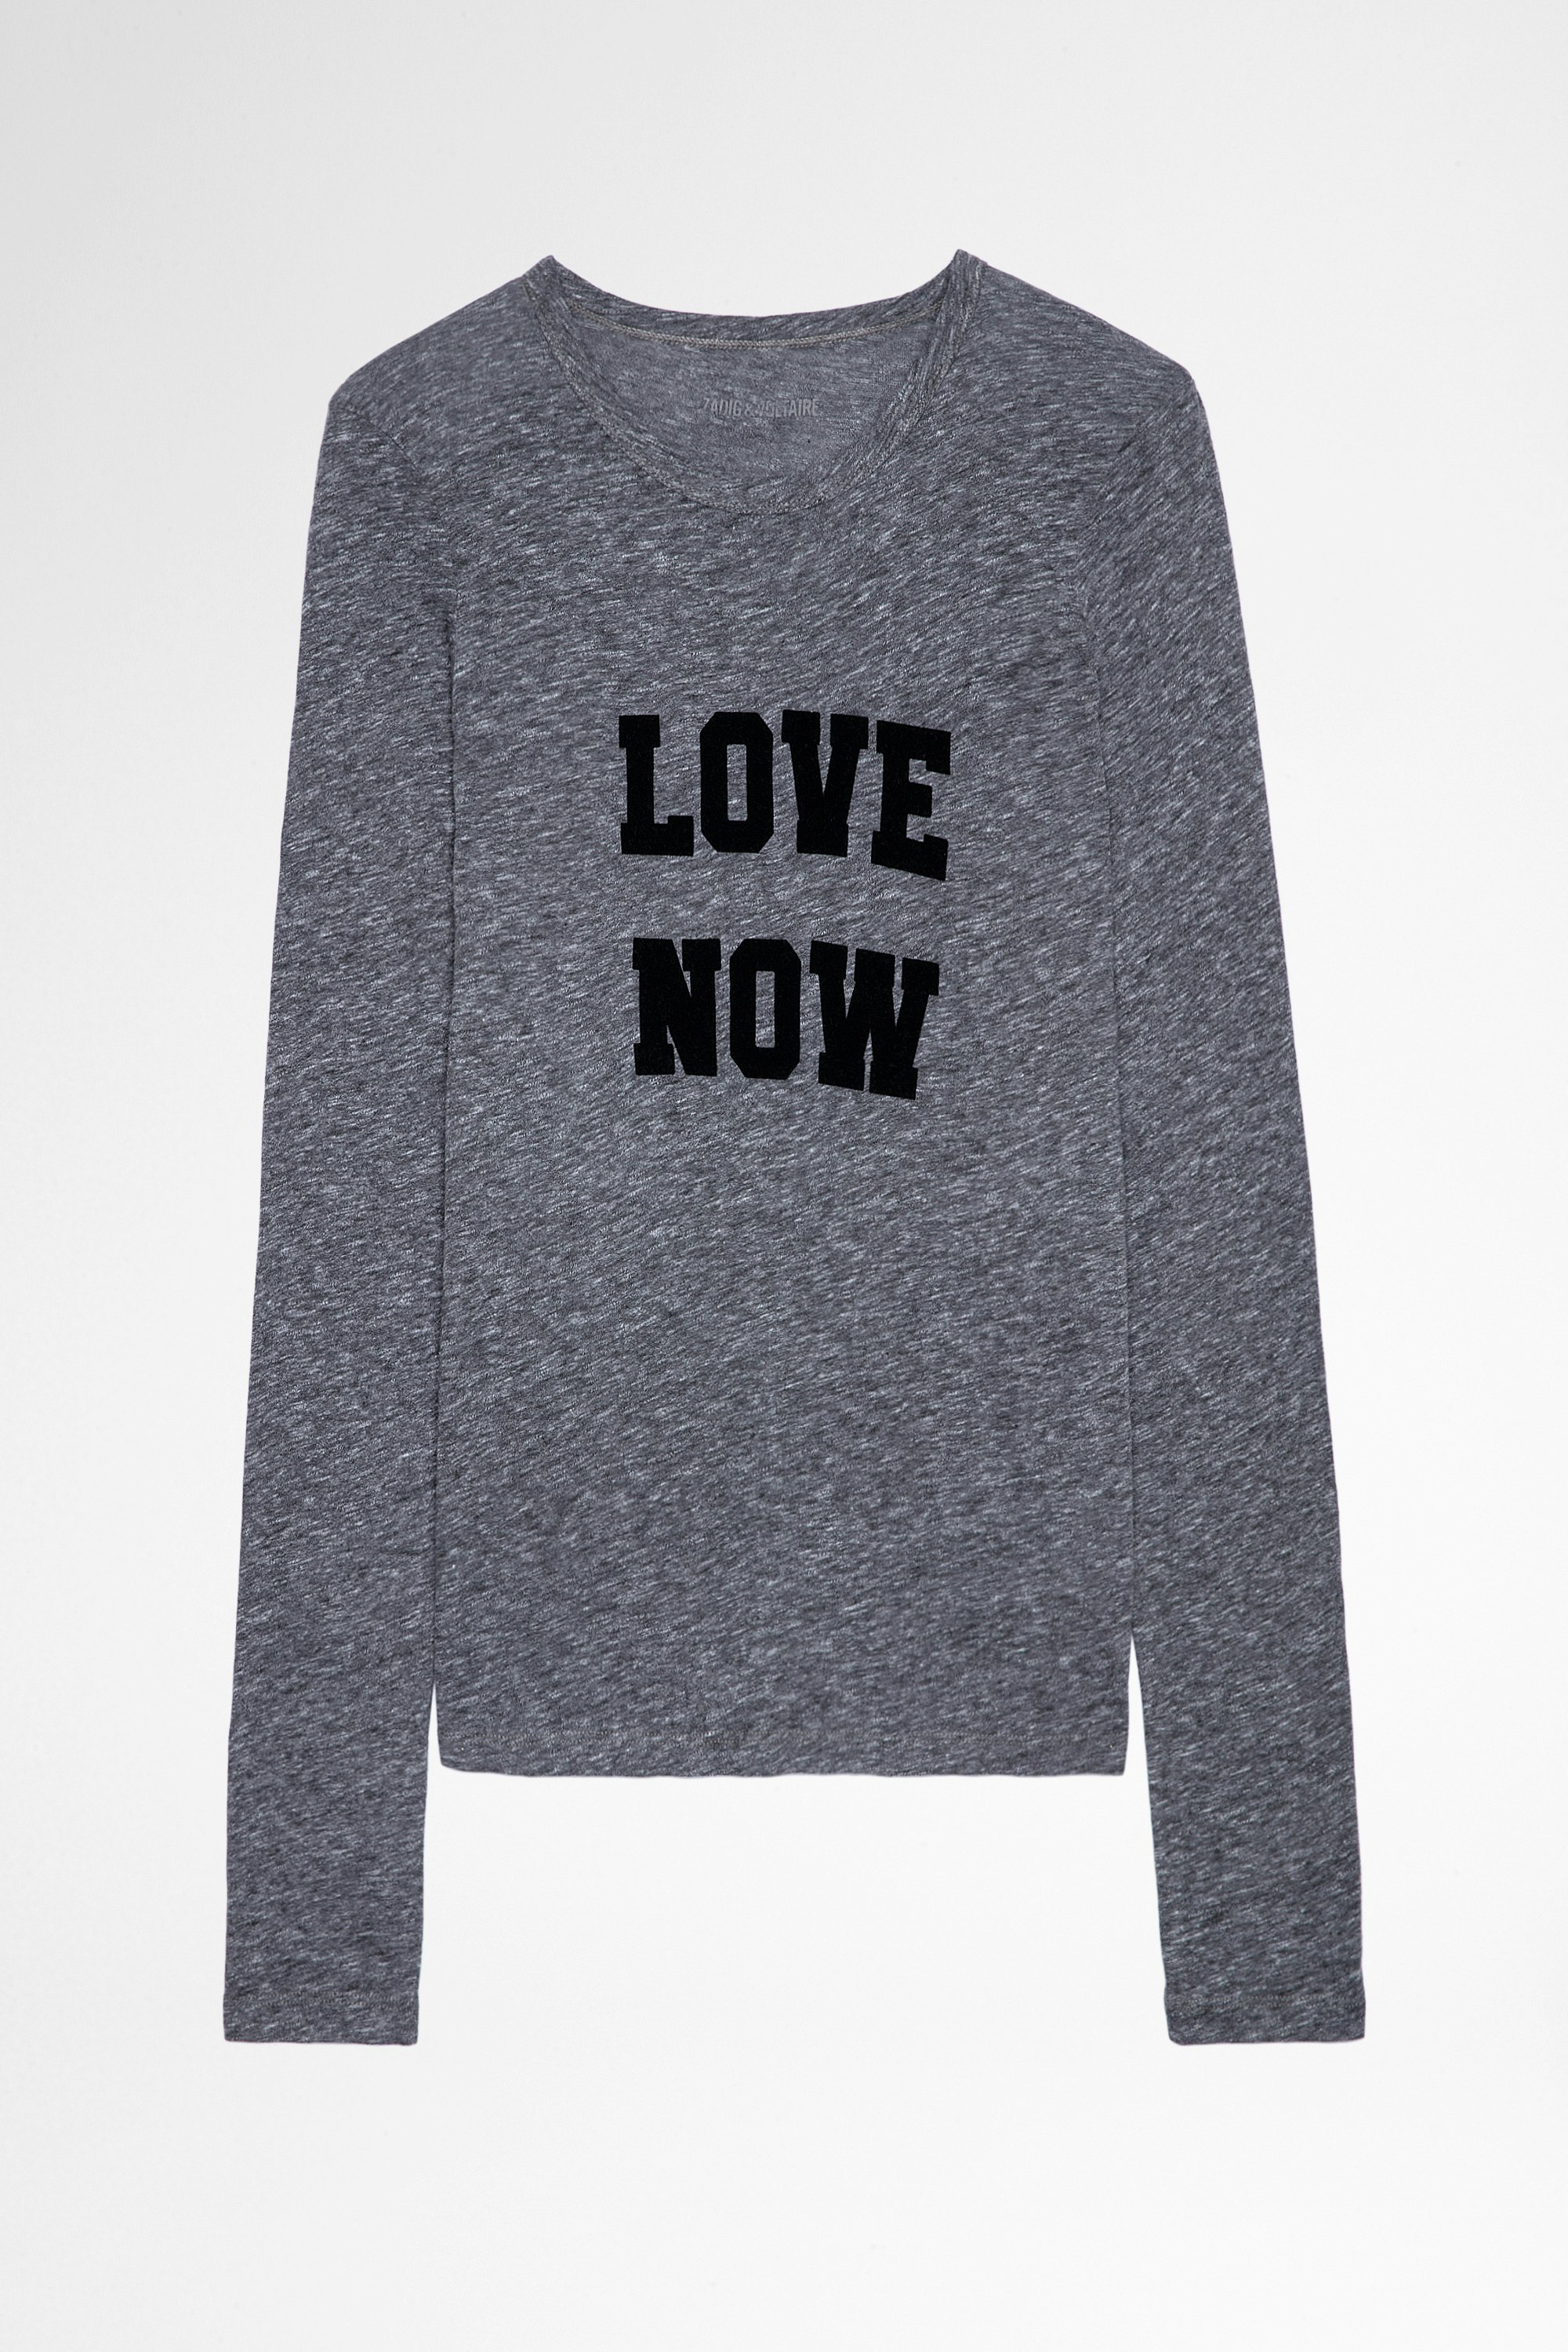 T-Shirt Willy T-shirt gris Love Now à manches longues Femme